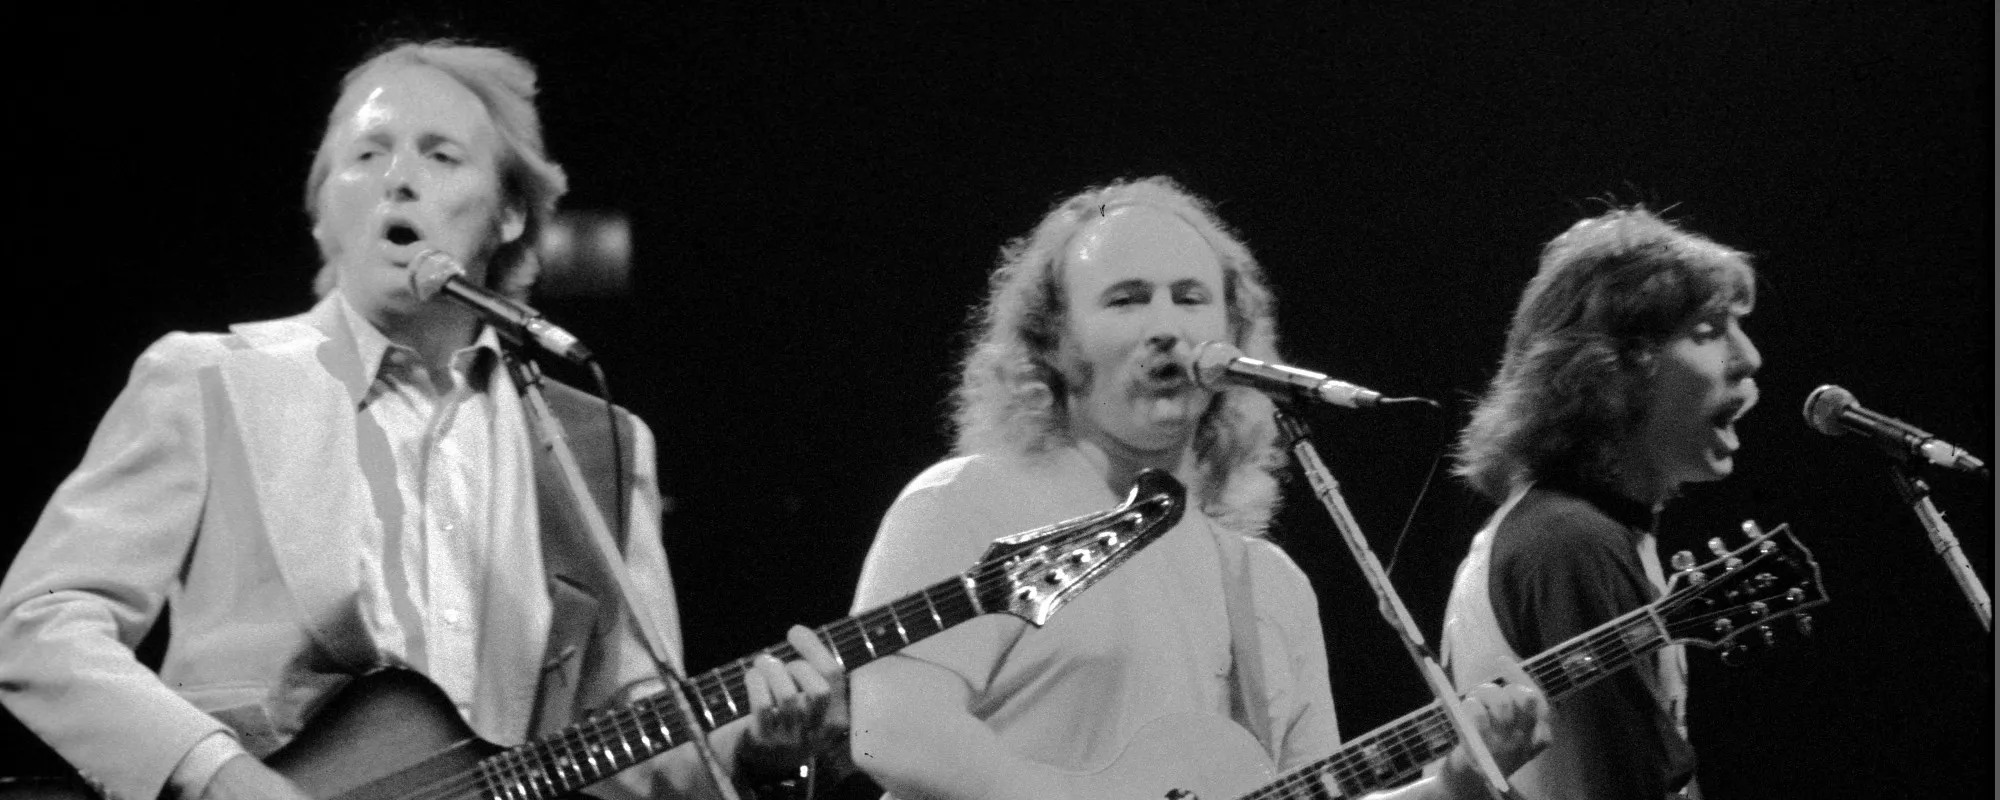 Crosby, Stills, Nash & Young to Release Book About Band’s History